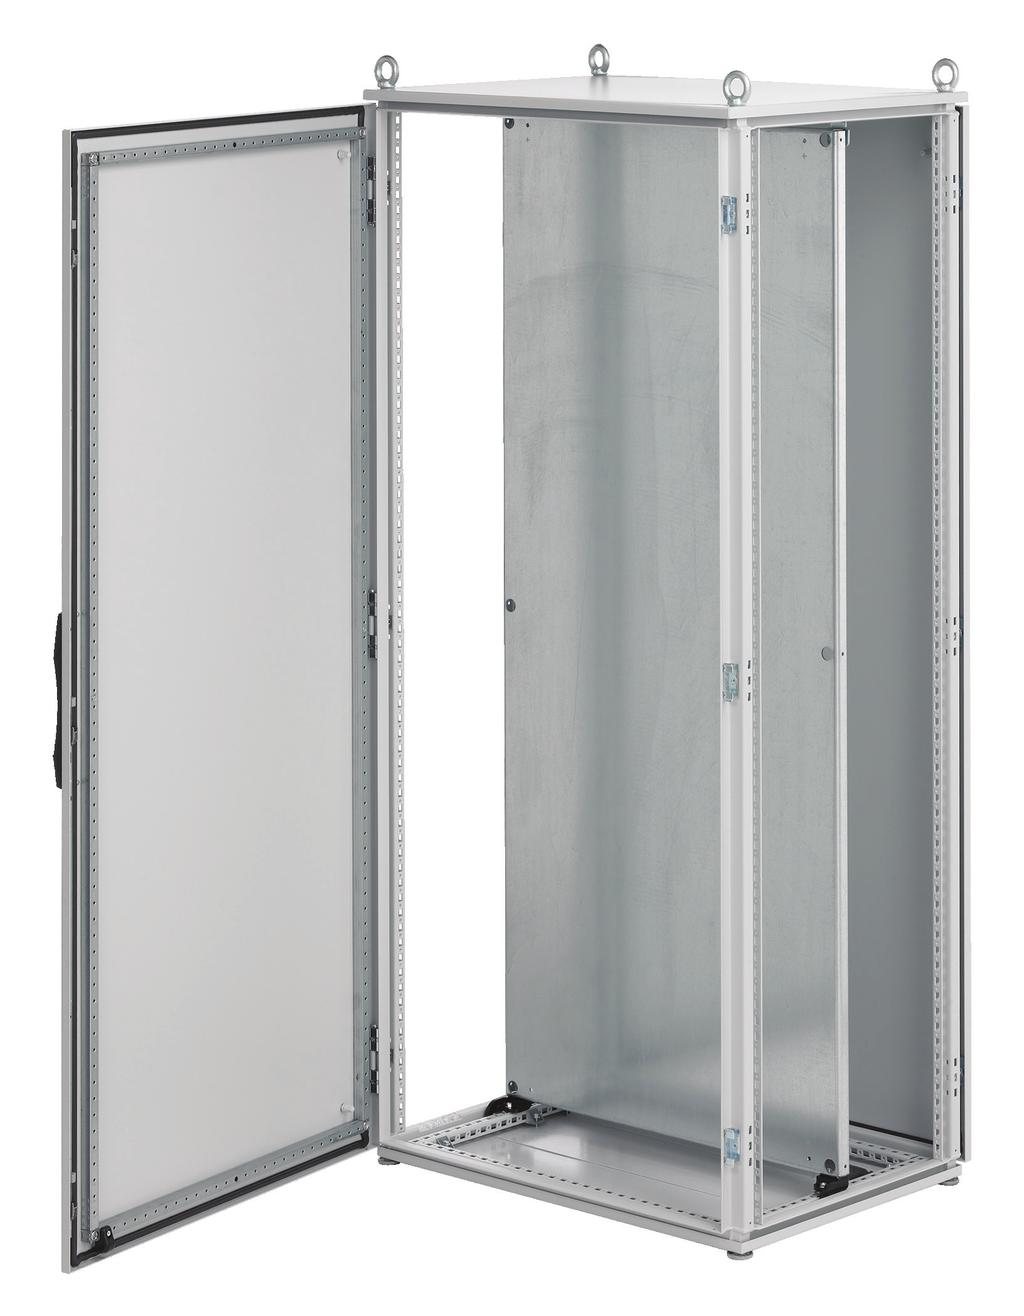 PROLINE Modular Enclosures Product Overview FOUR WAYS TO SELECT YOUR PROLINE OPTION 1: SIMPLE PROLINE PRECONFIGURED INDUSTRIAL PACKAGES PROLINE preconfigured industrial packages include a solid door,